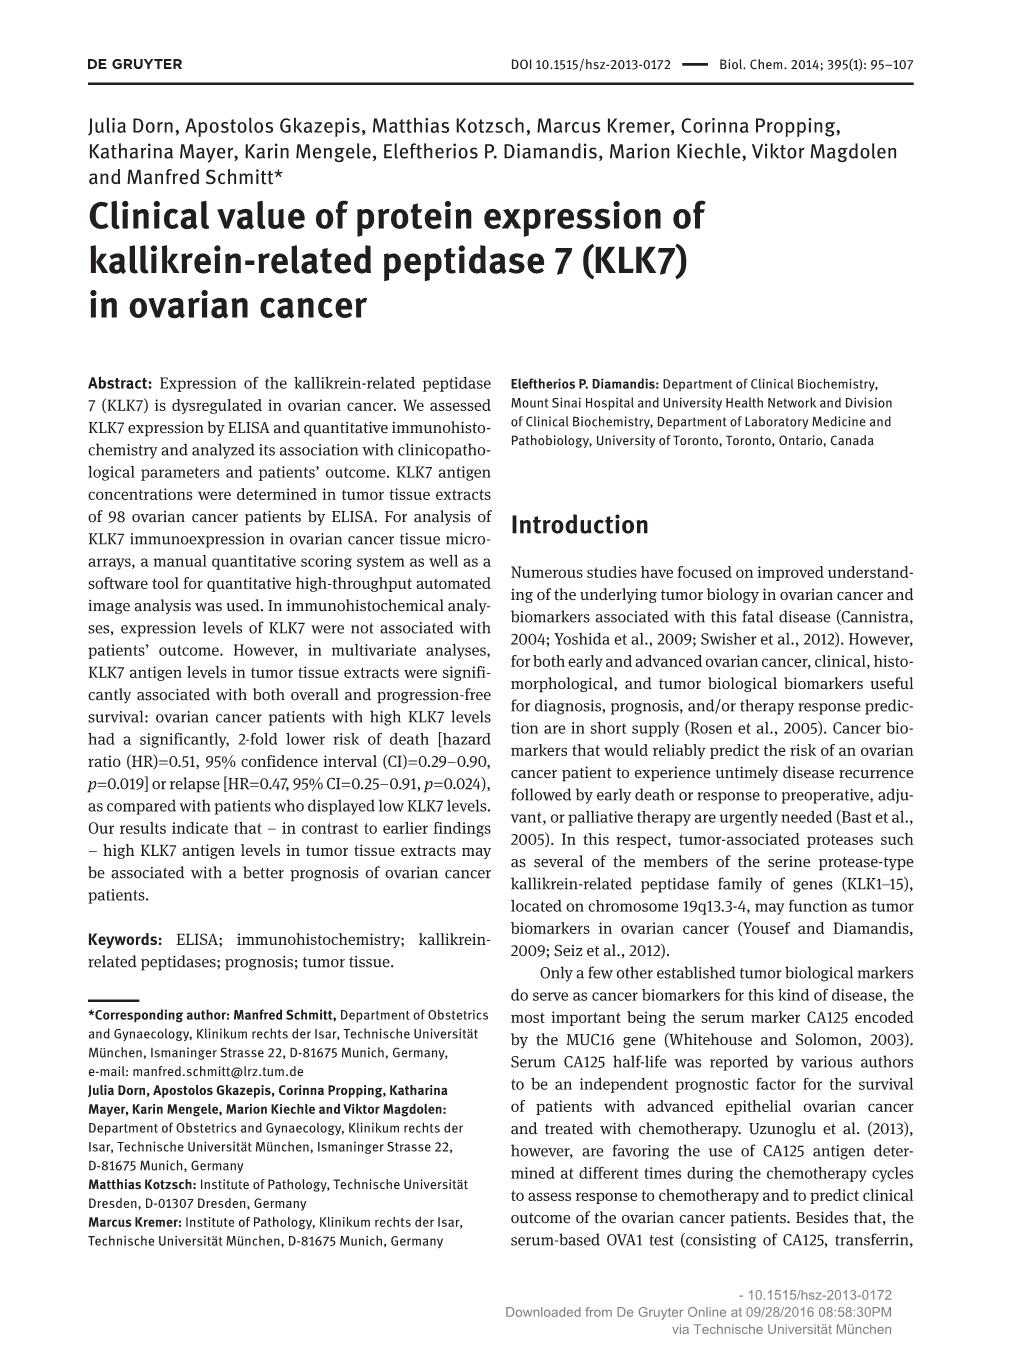 Clinical Value of Protein Expression of Kallikrein-Related Peptidase 7 (KLK7) in Ovarian Cancer